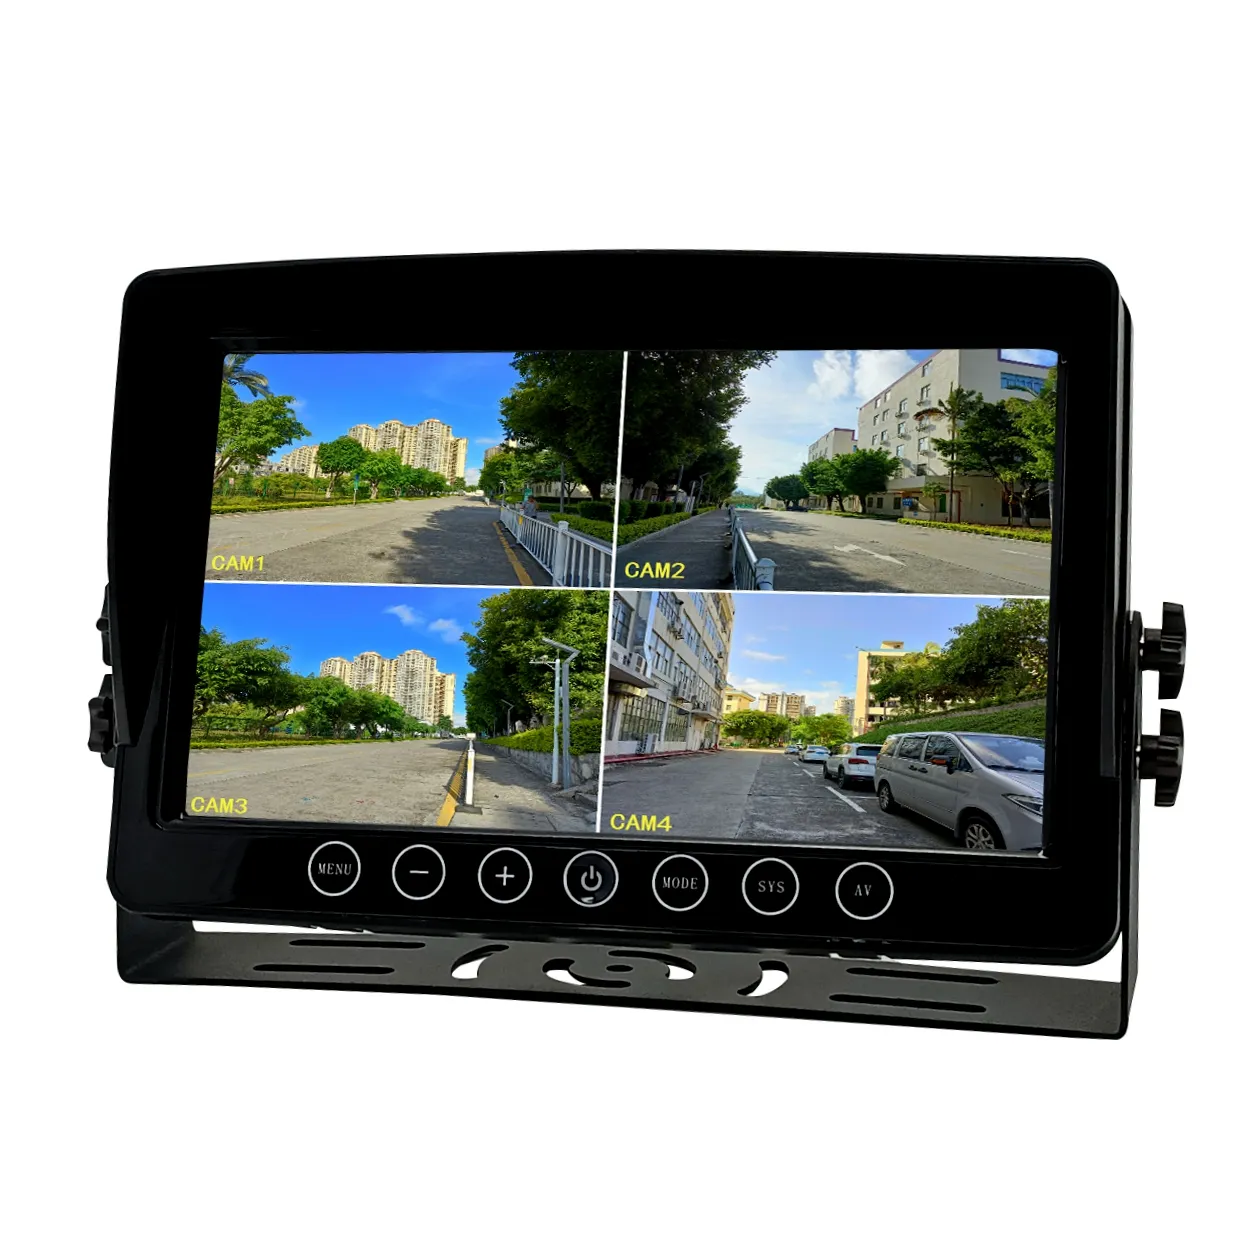 9 inch screen car monitor quad car monitor with 4 channel video recording